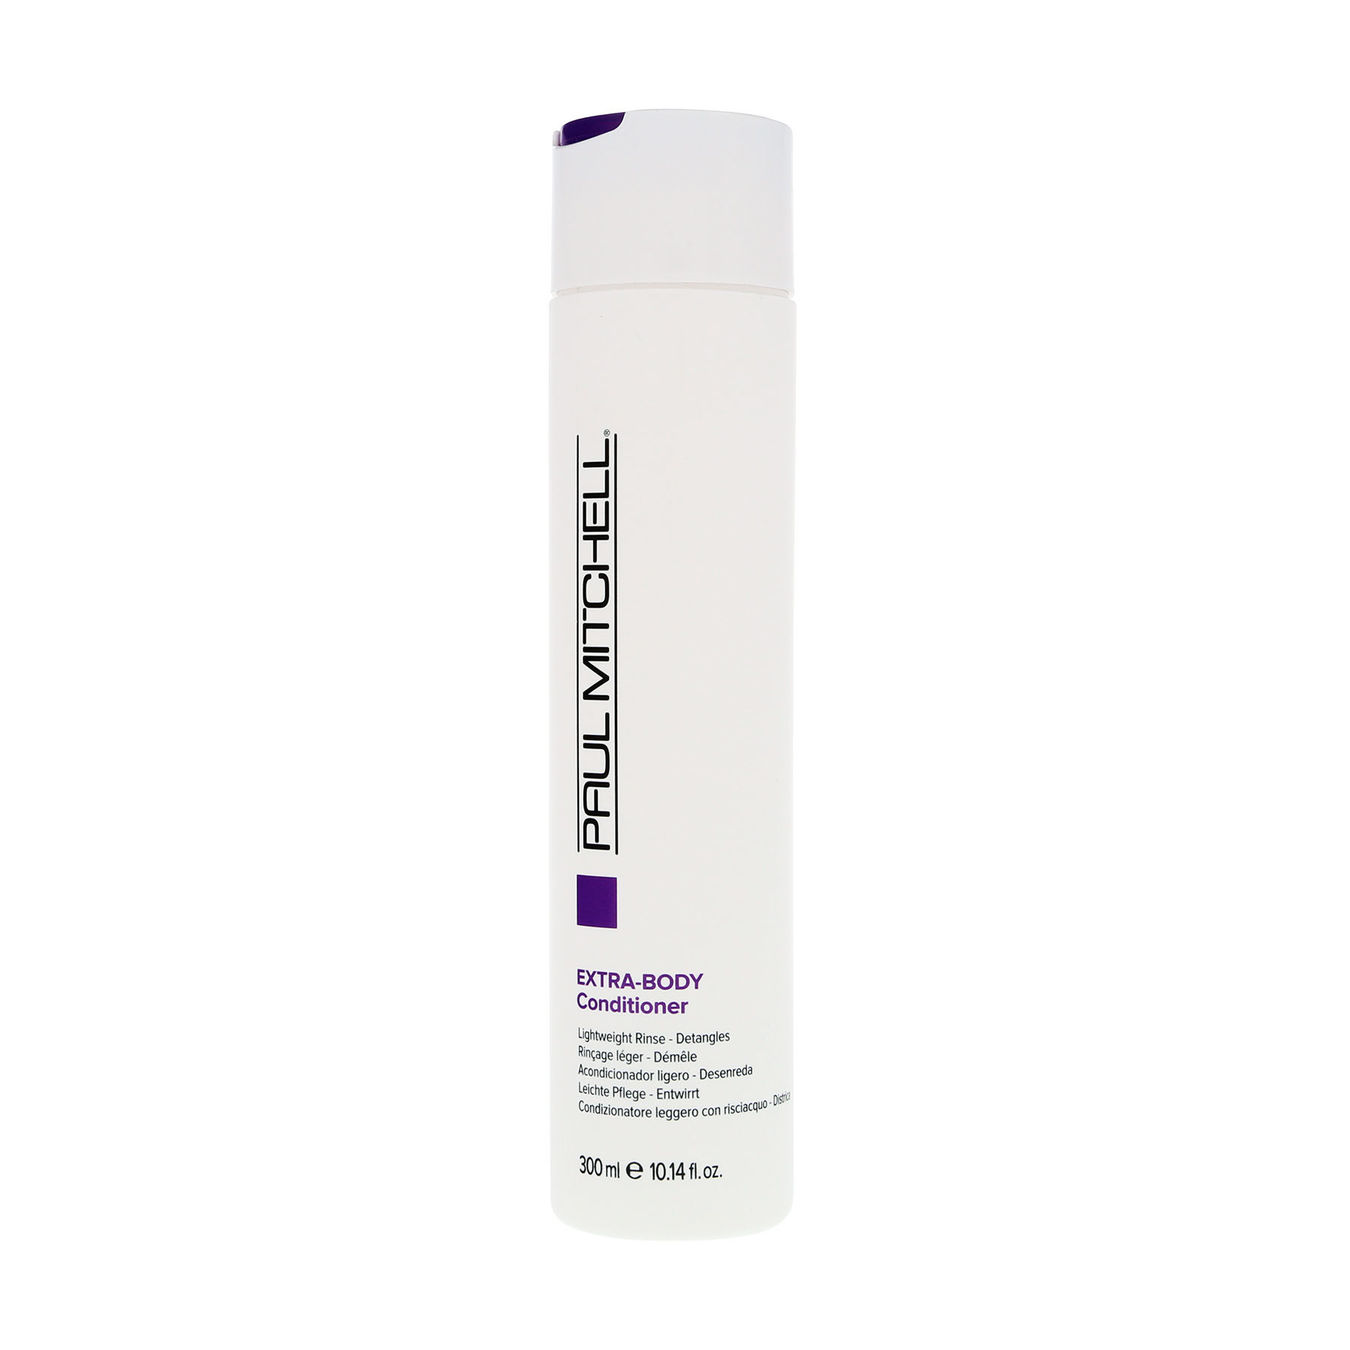 Paul Mitchell EXTRA-BODY Conditioner